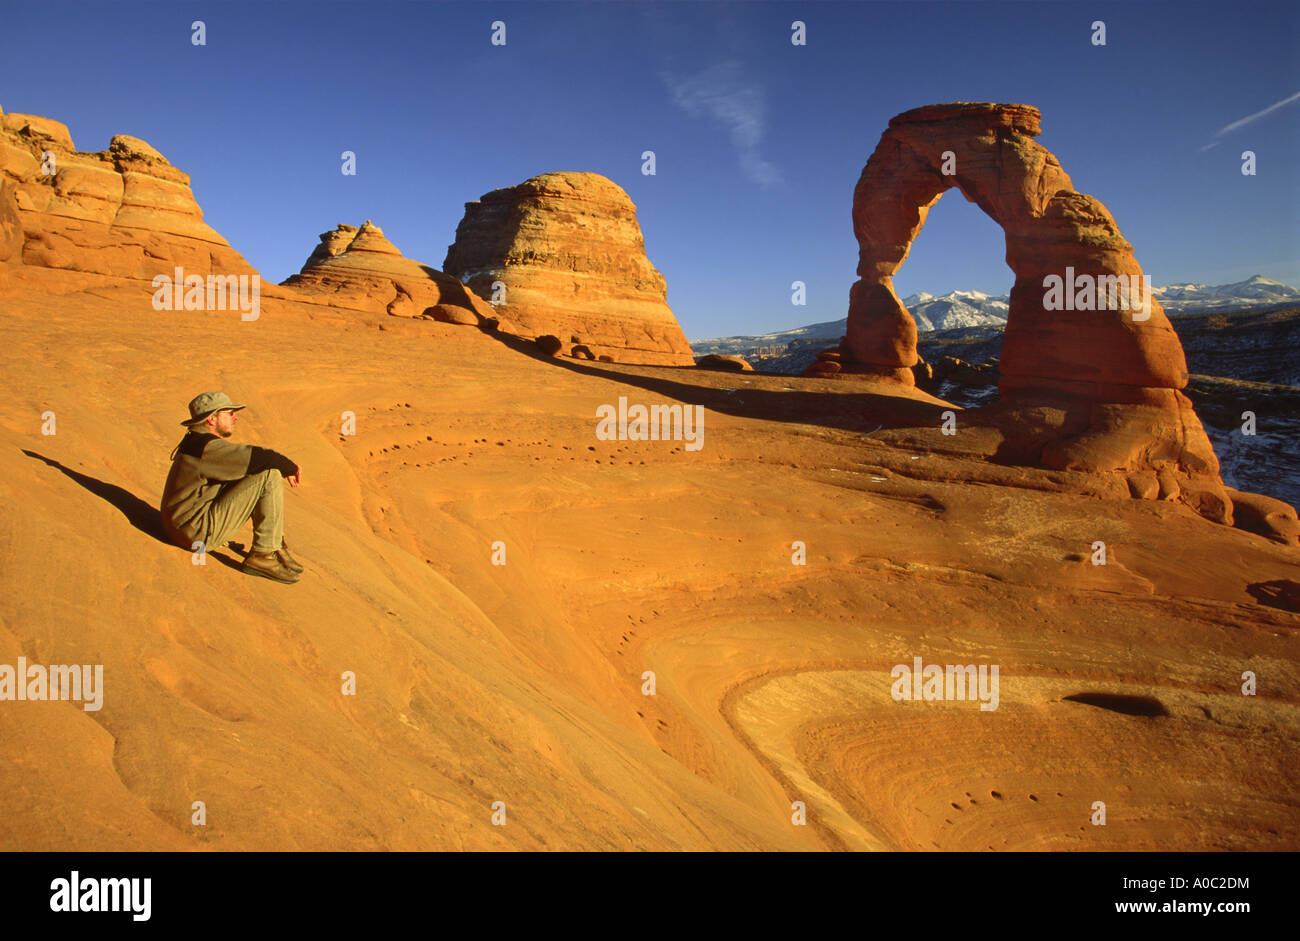 Hiker near Delicate Arch in winter, La Sal Mts in dist, Arches Nat Park, Utah, USA Stock Photo